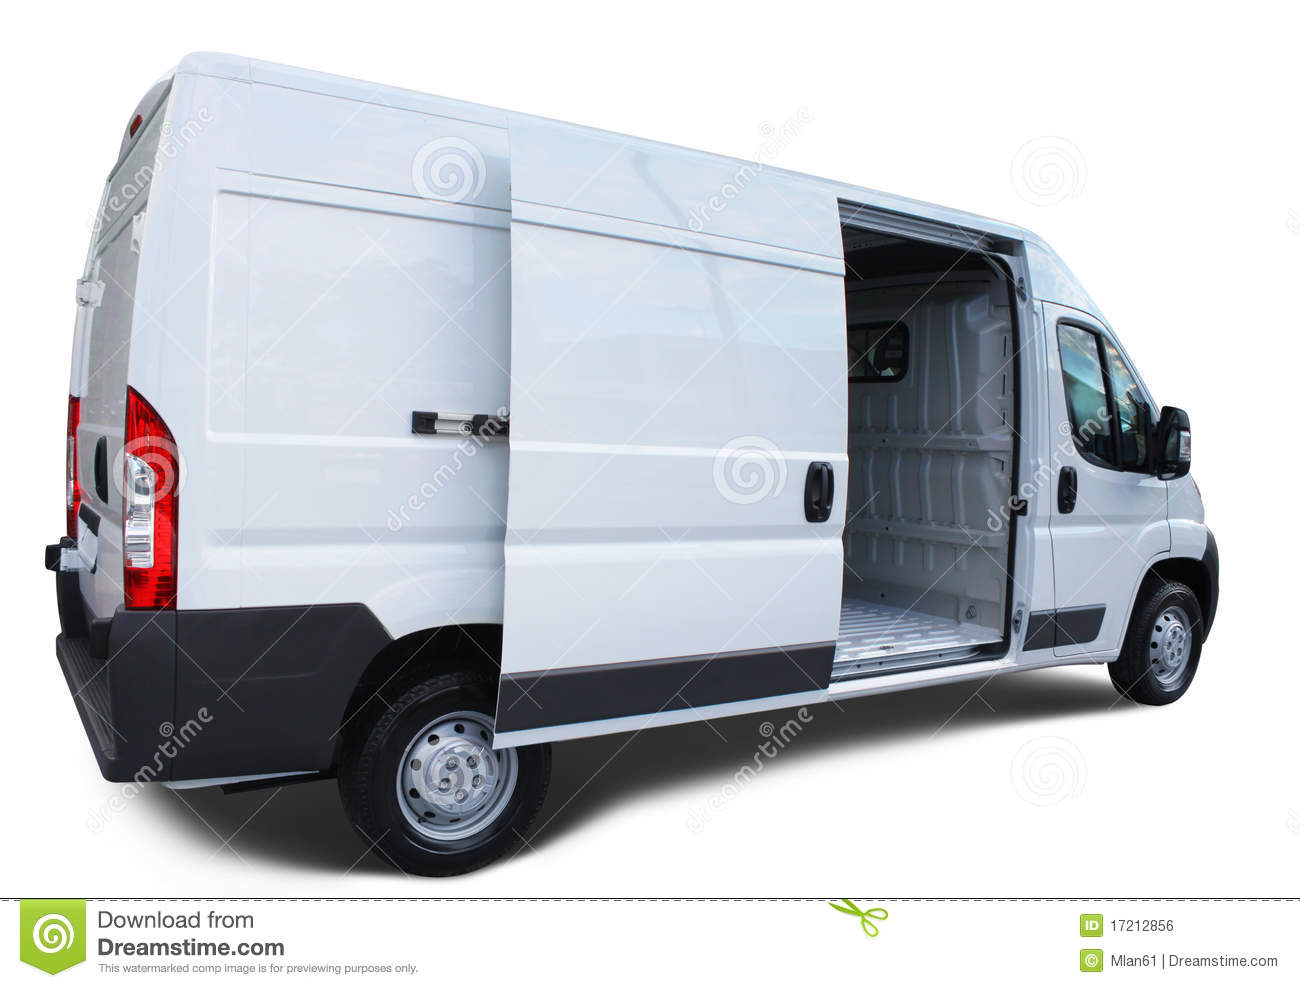 Delivery Van Royalty Free Stock Image   Image  17212856